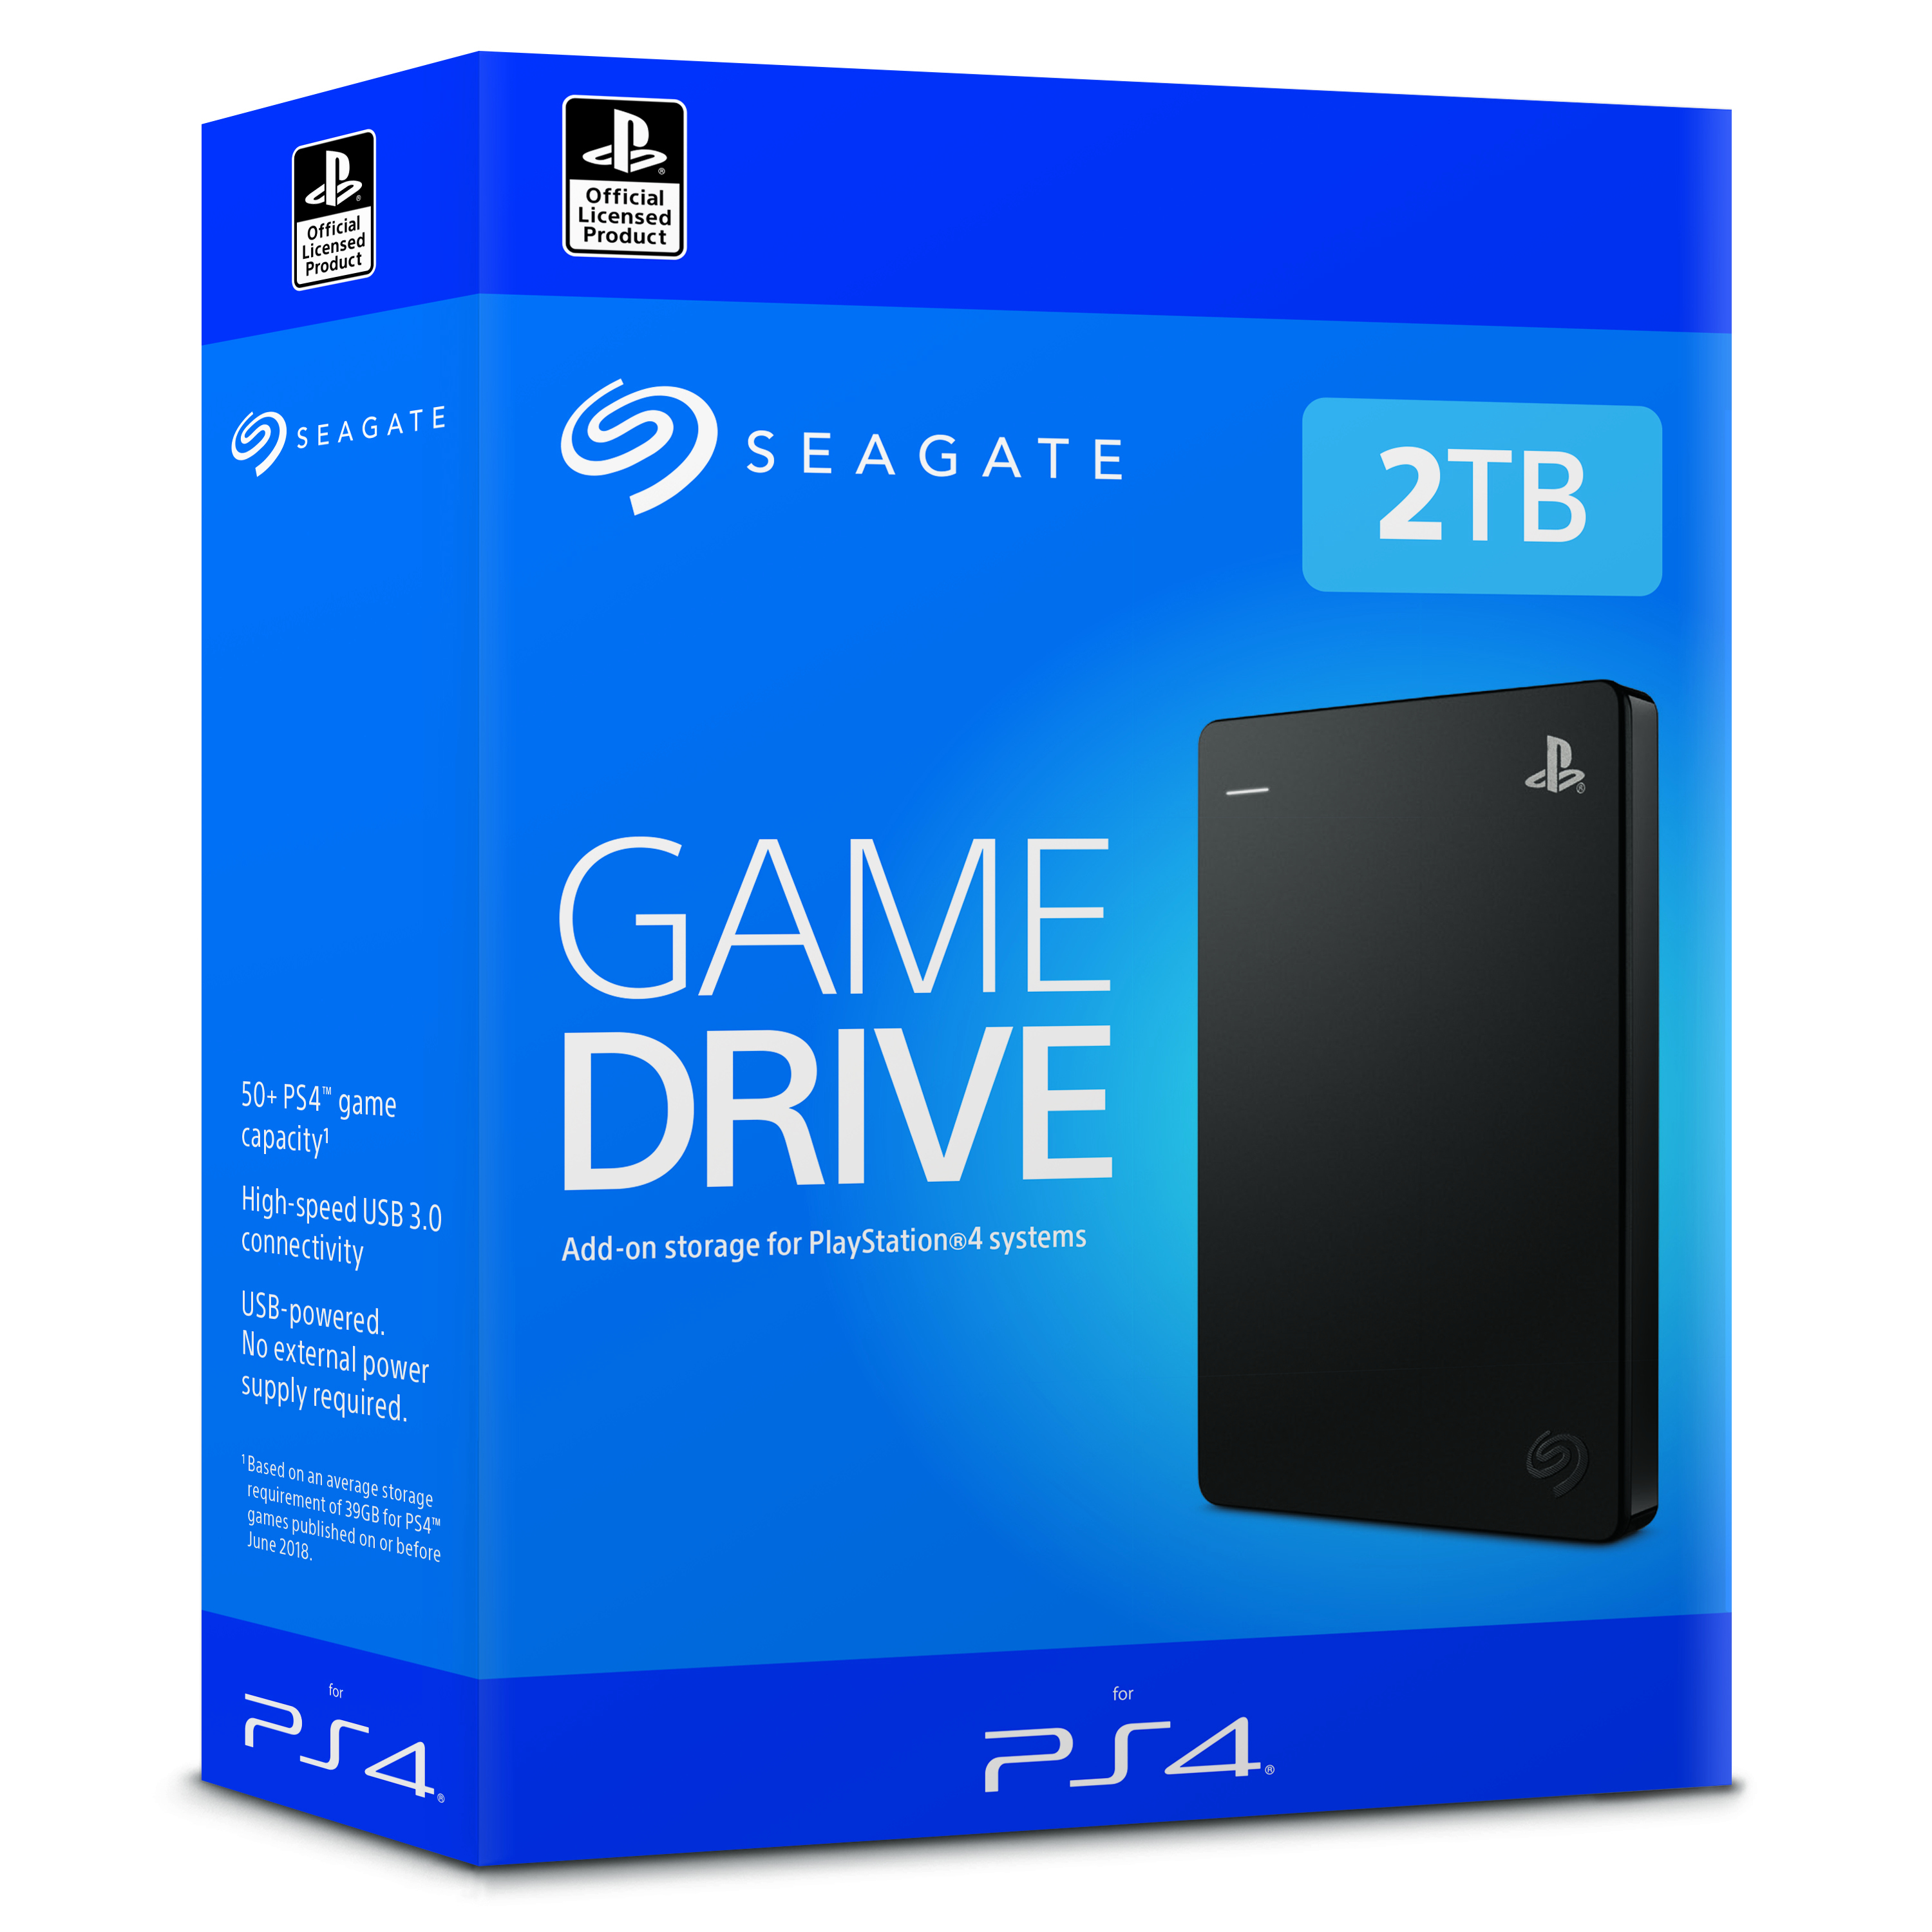 Seagate STGD2000200 | Seagate Game 2 - for extern - STGD2000200 Festplatte - TB (tragbar) PS4 Drive